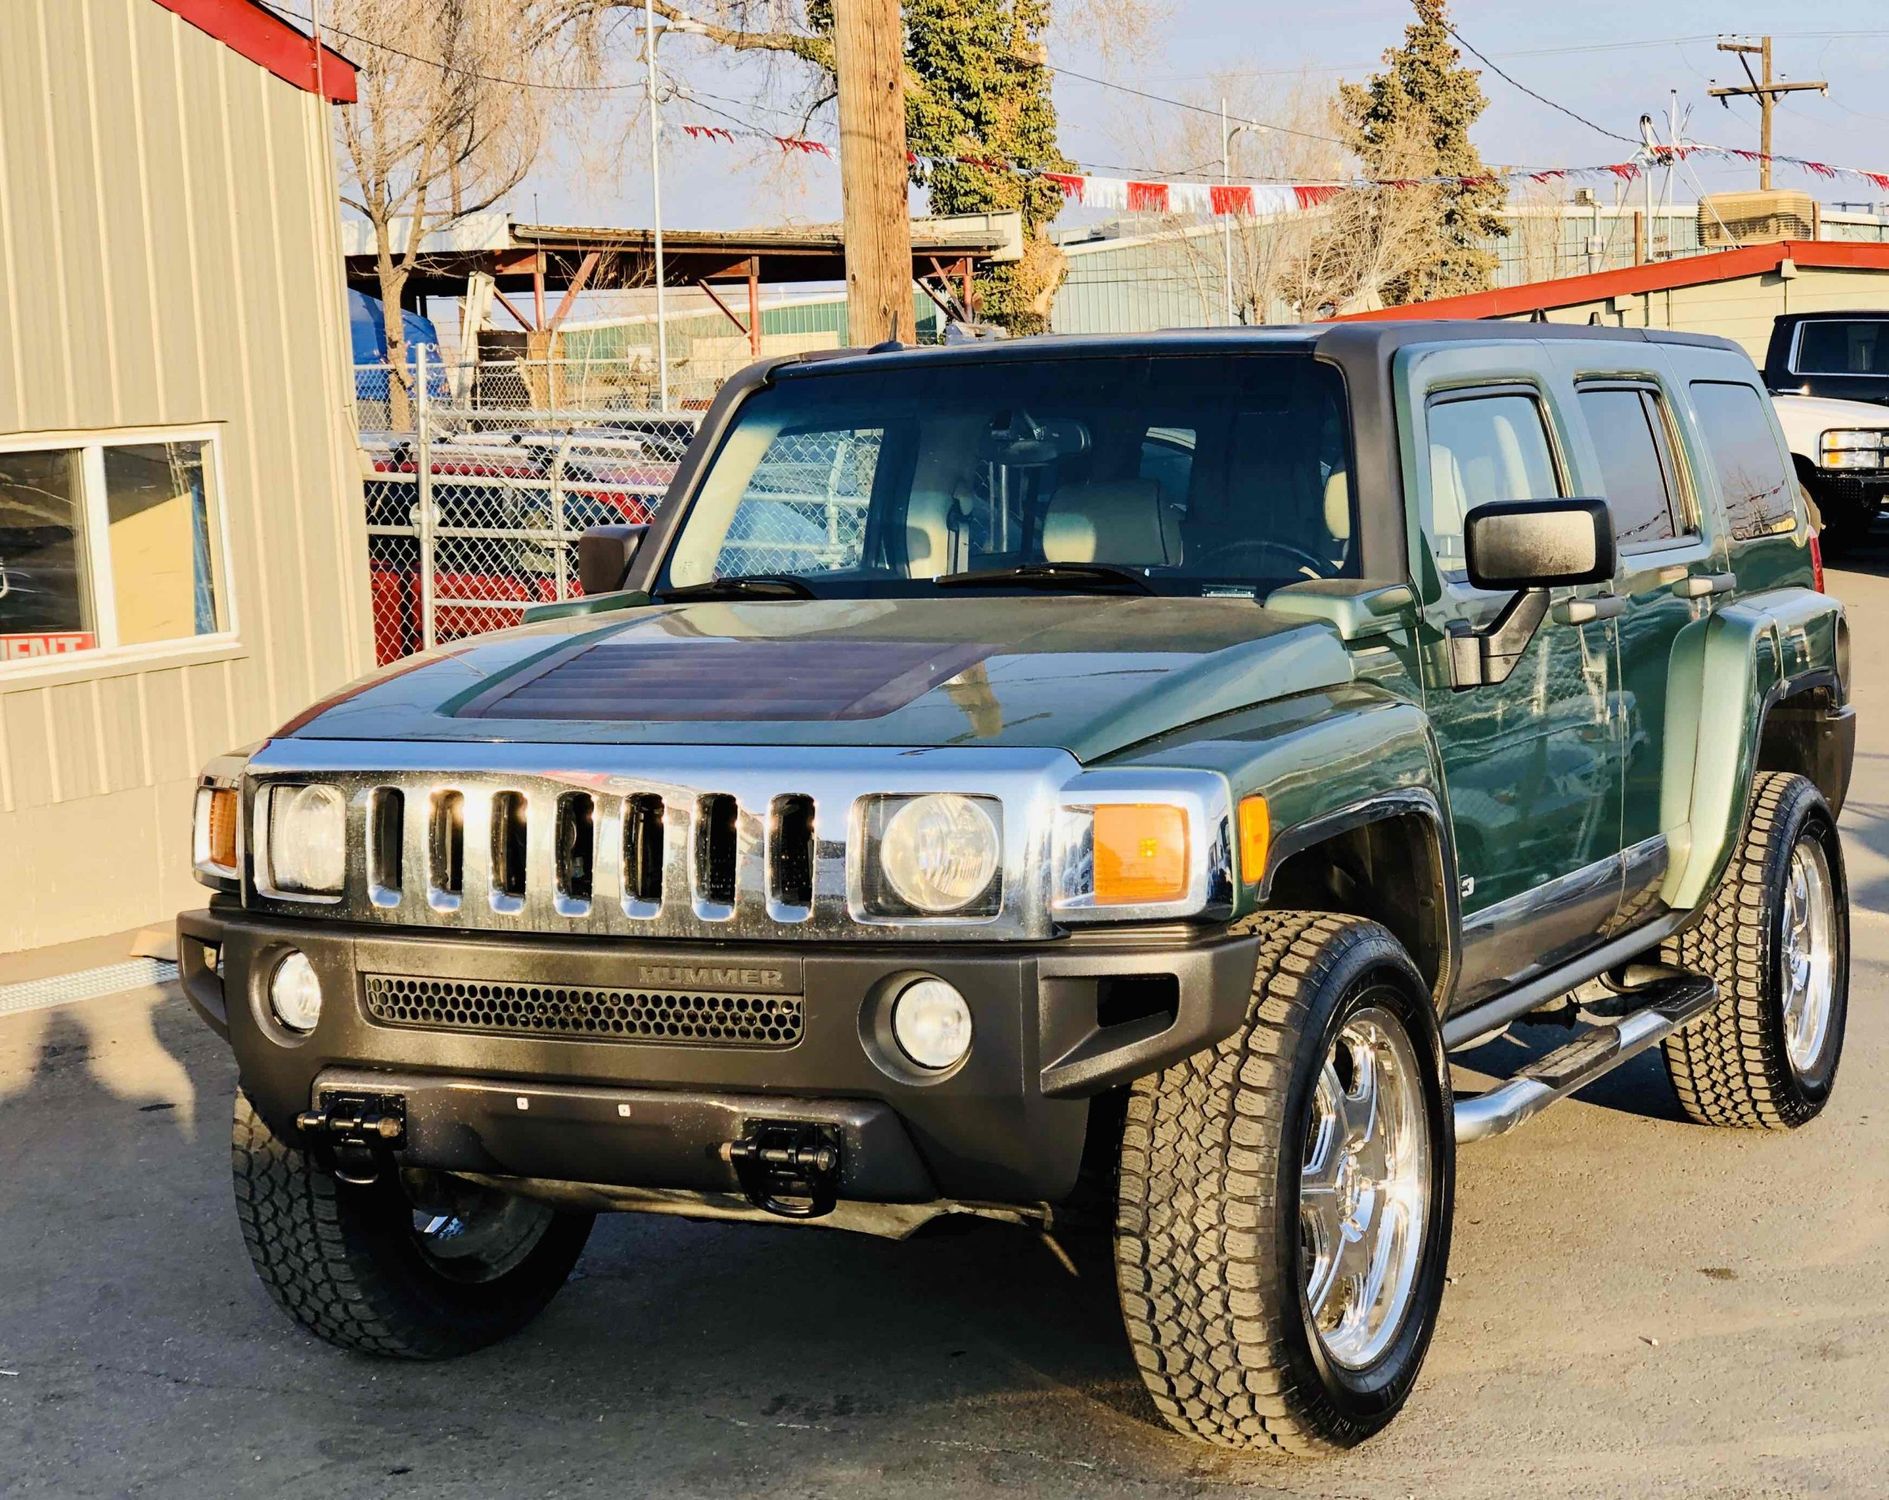 2006 Hummer H3 Luxury Example Site